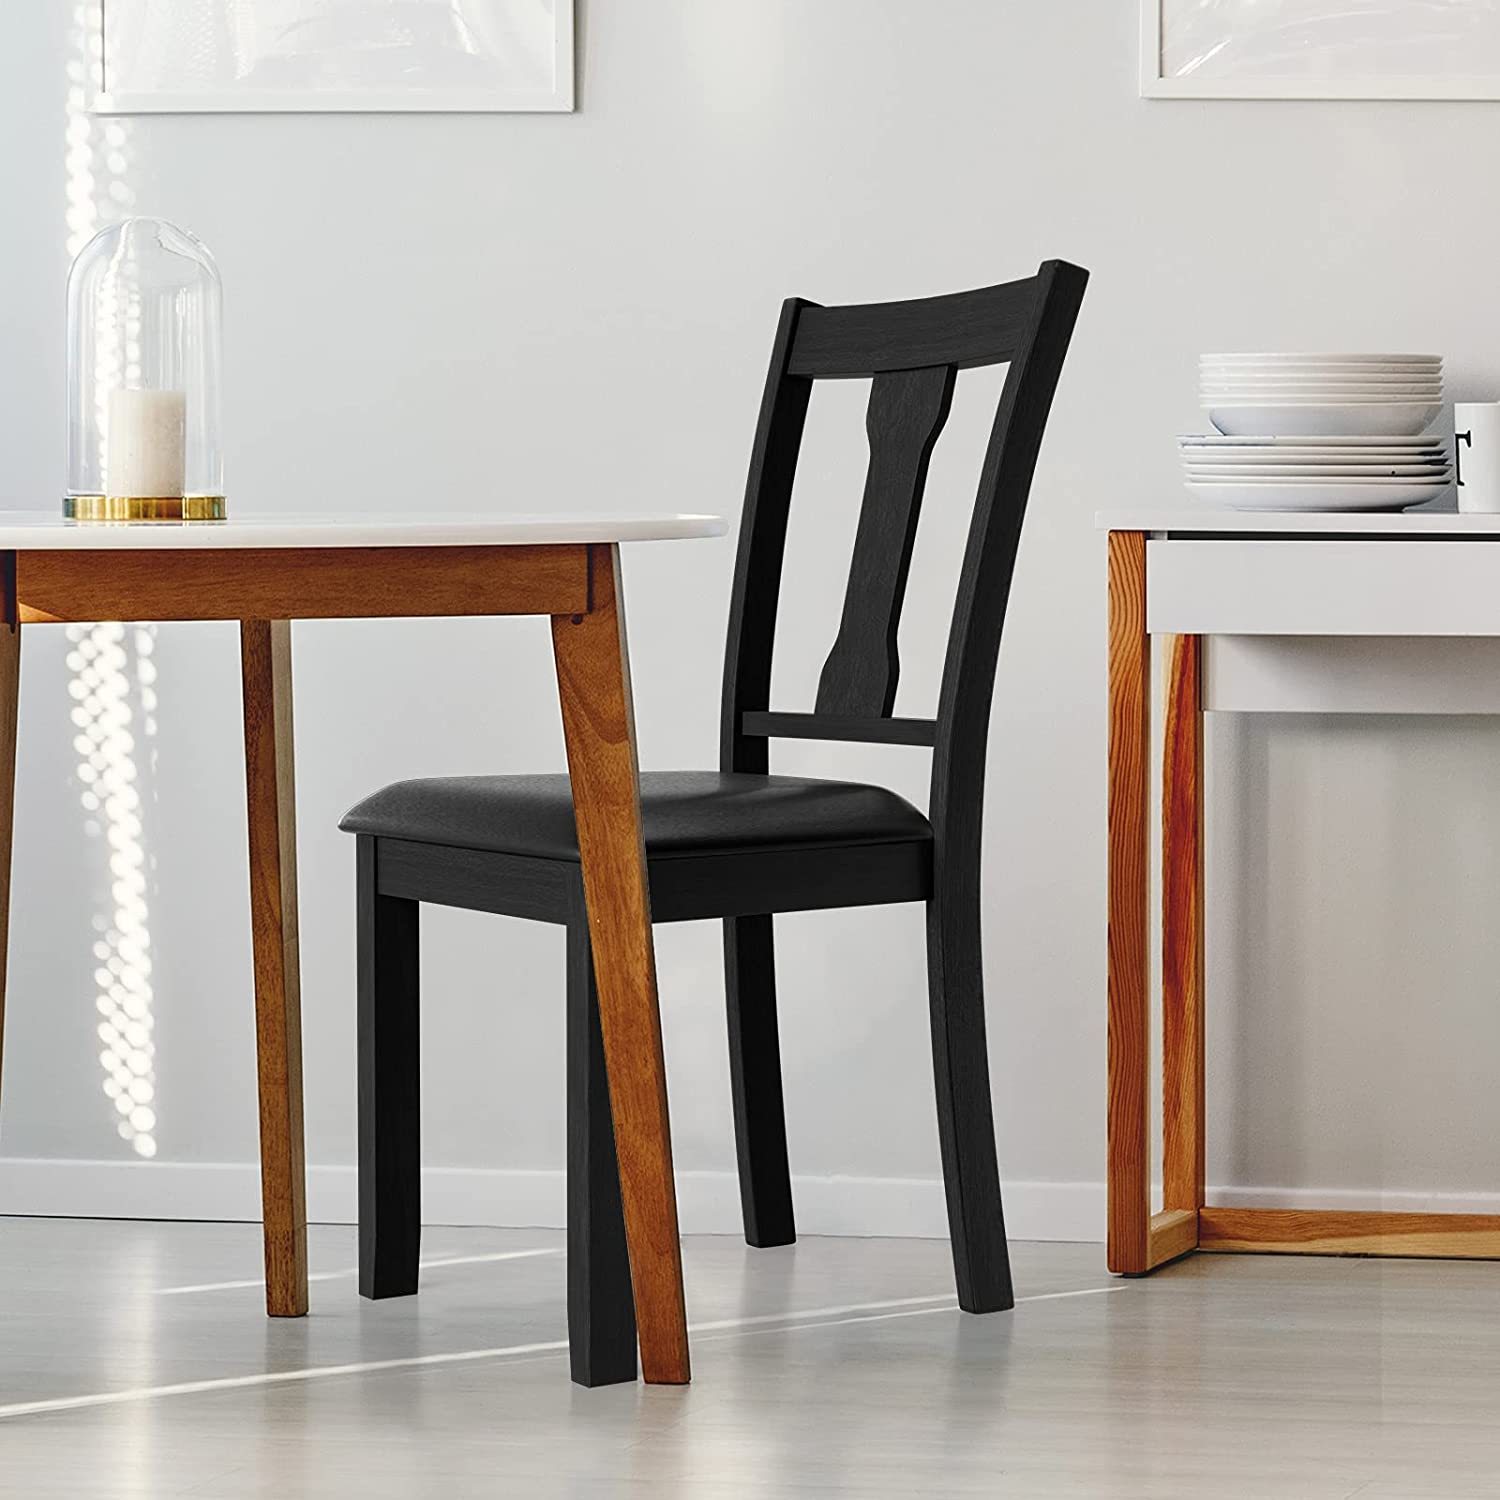 Giantex PVC Leather Modern Wood Dining Side Chair